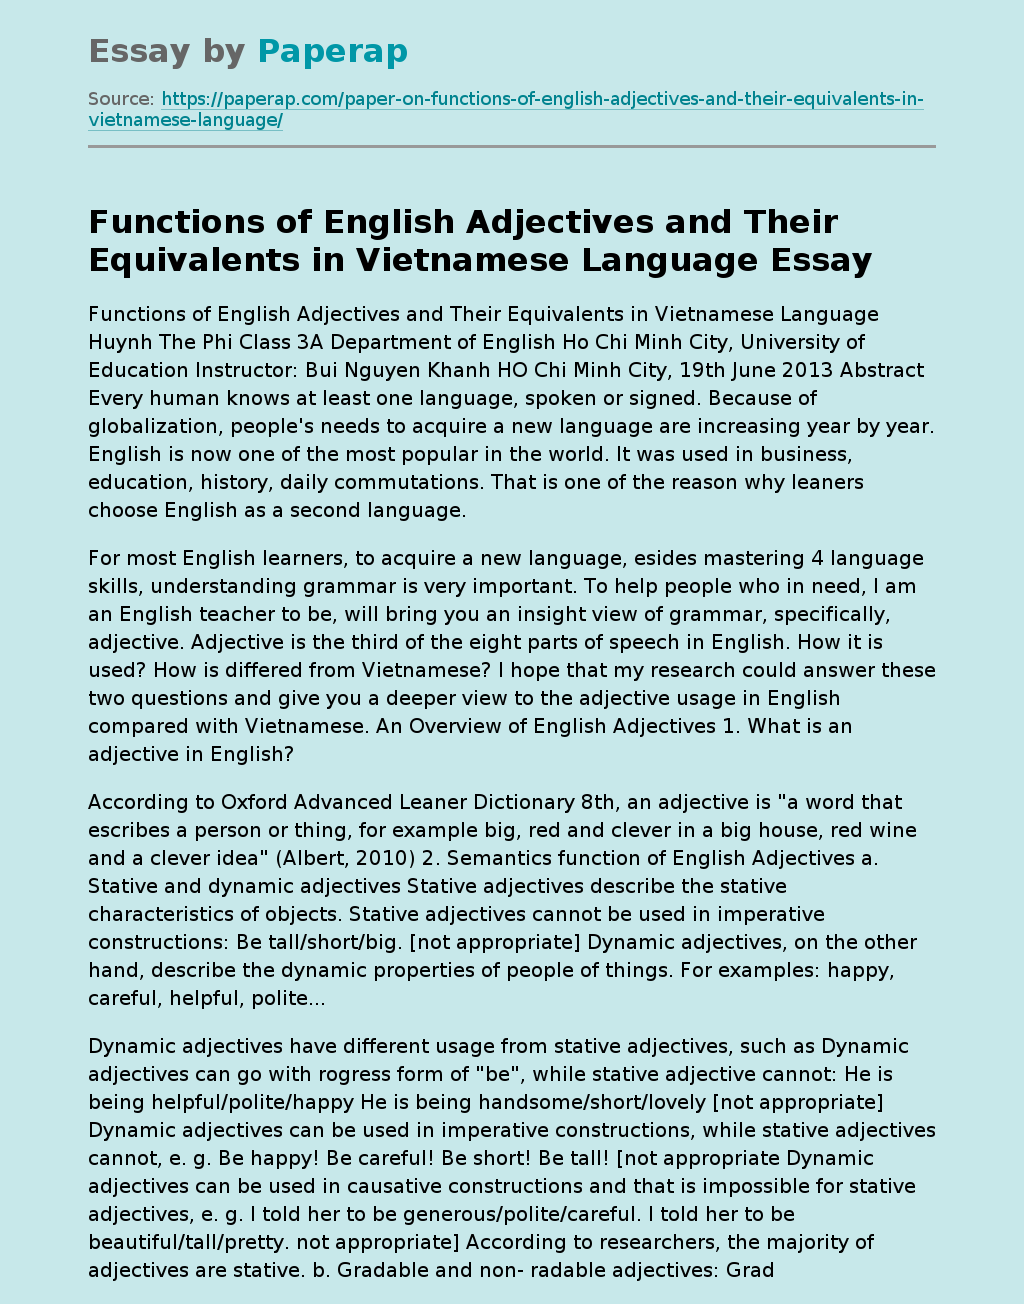 Functions of English Adjectives and Their Equivalents in Vietnamese Language